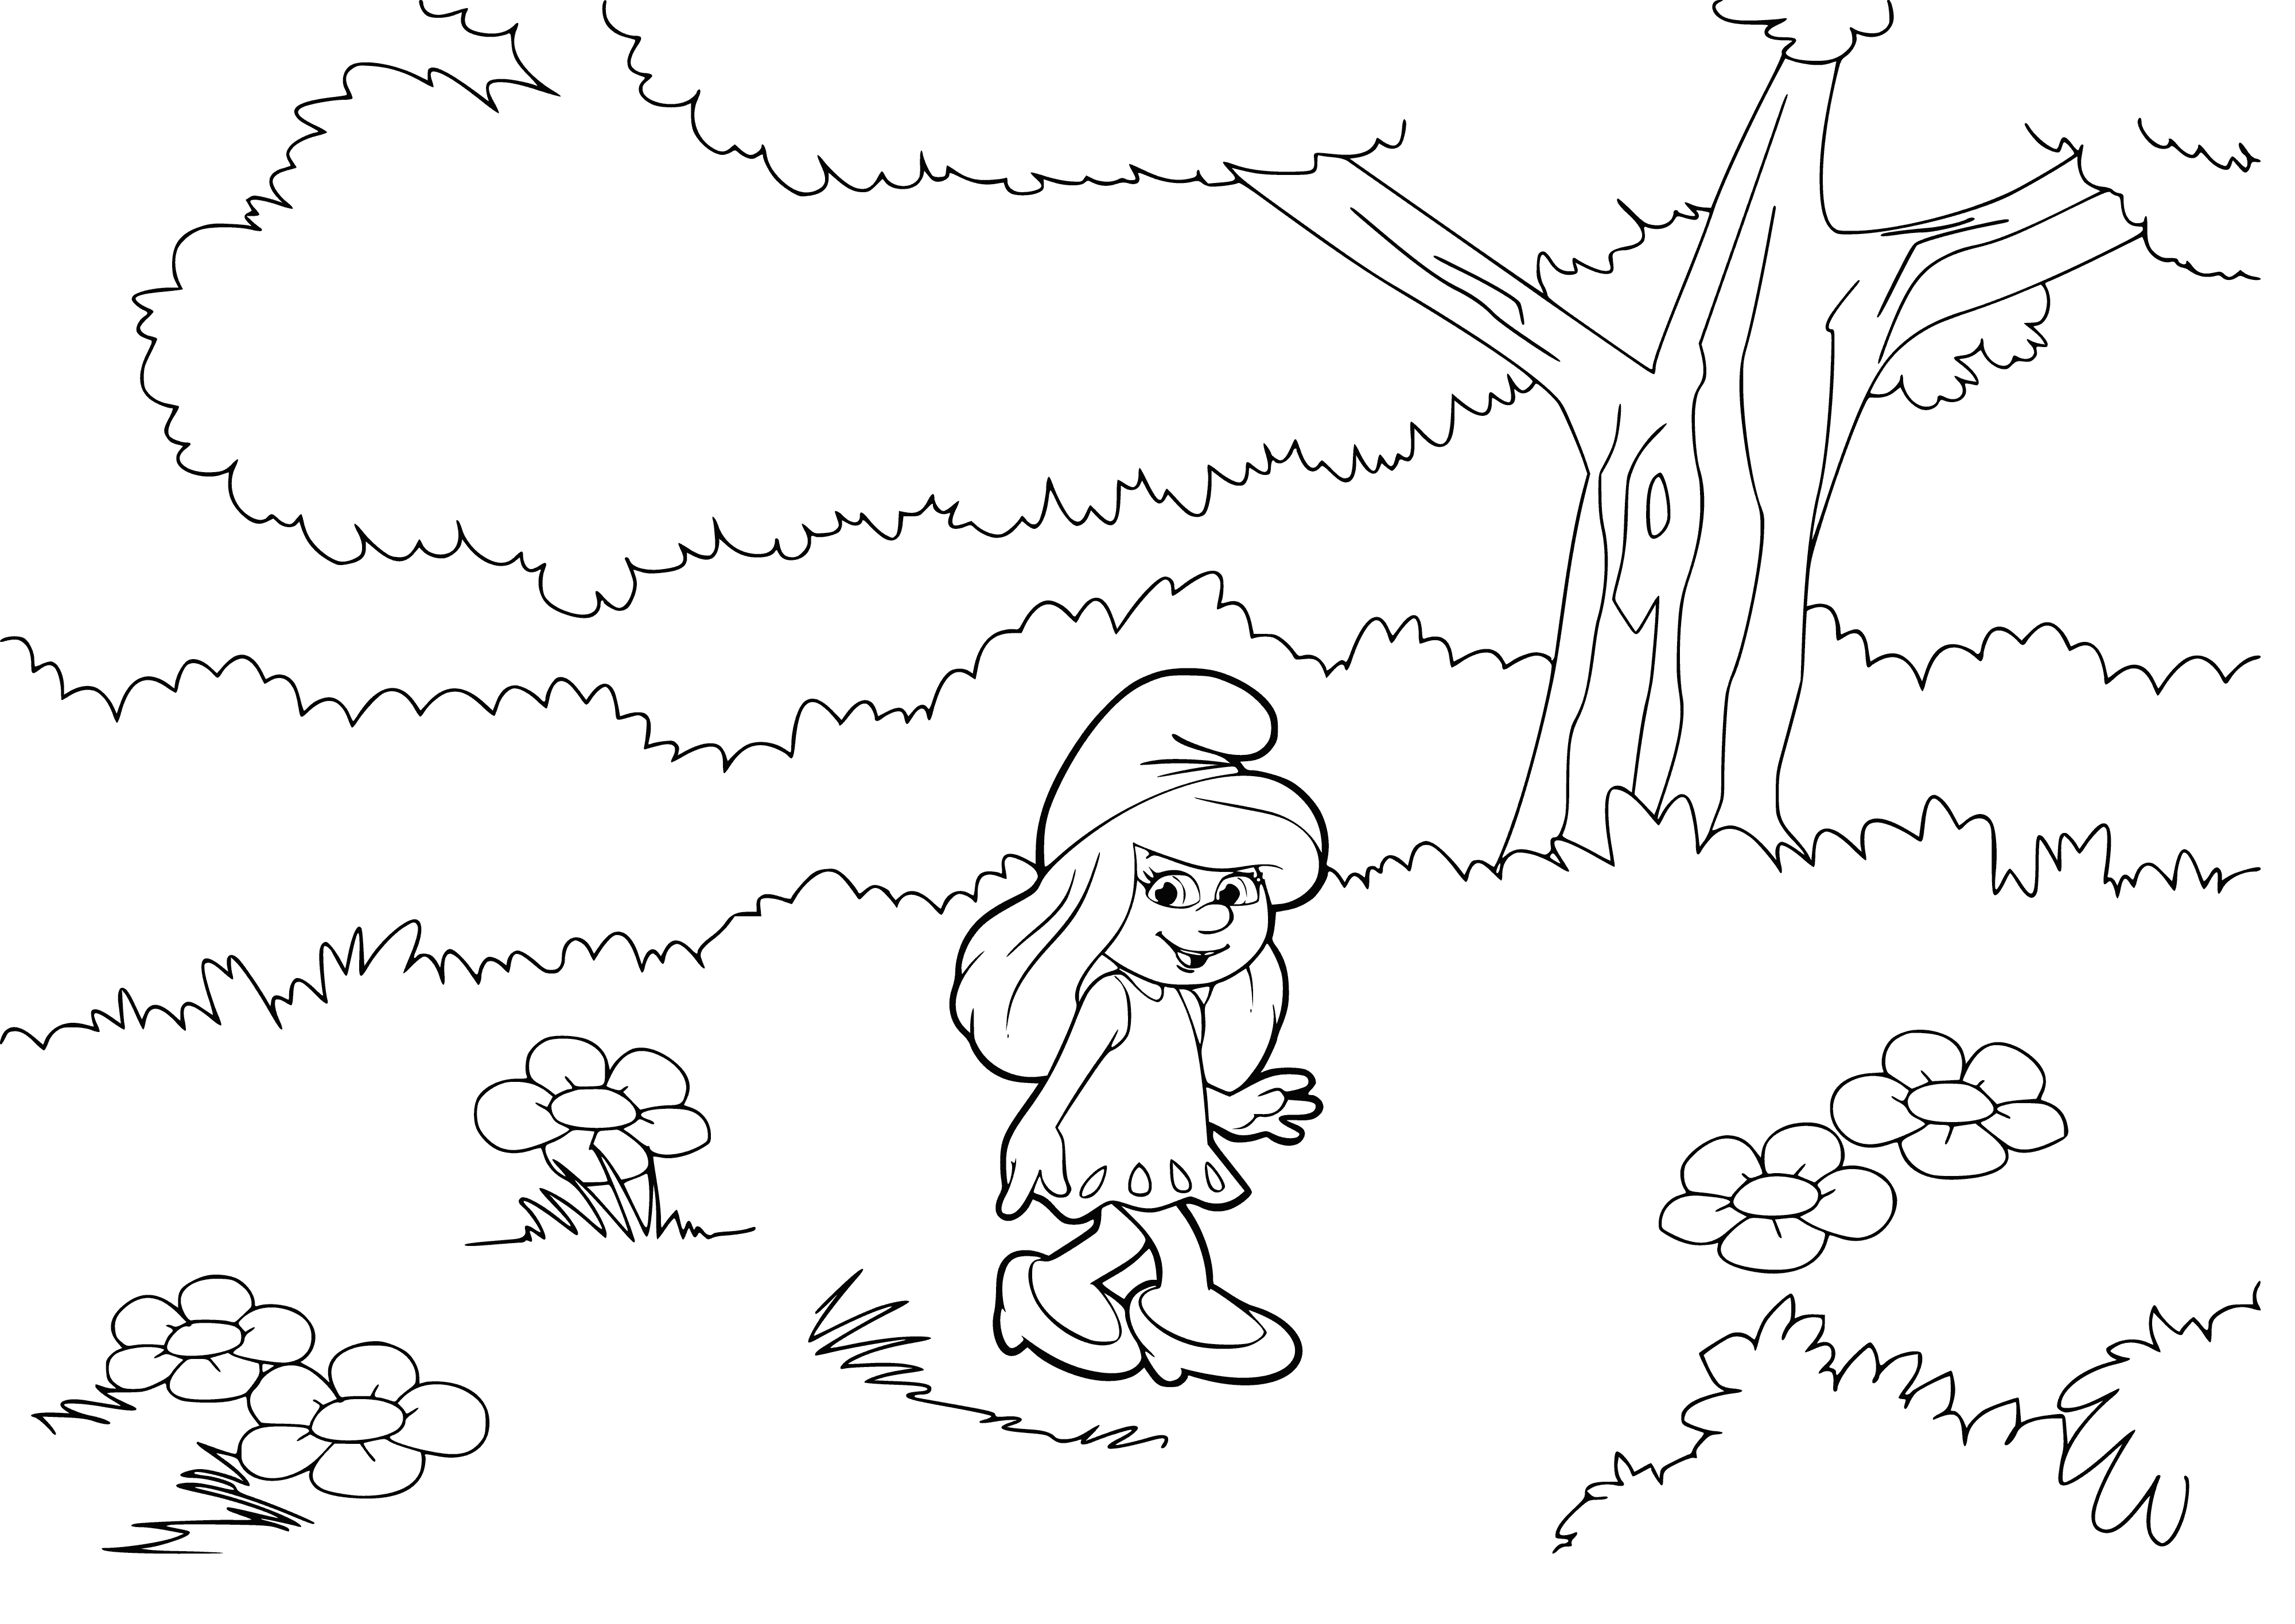 coloring page: Creature with white hat & pants standing in front of mushroom house, holding a yellow flower in one hand. #coloringpage